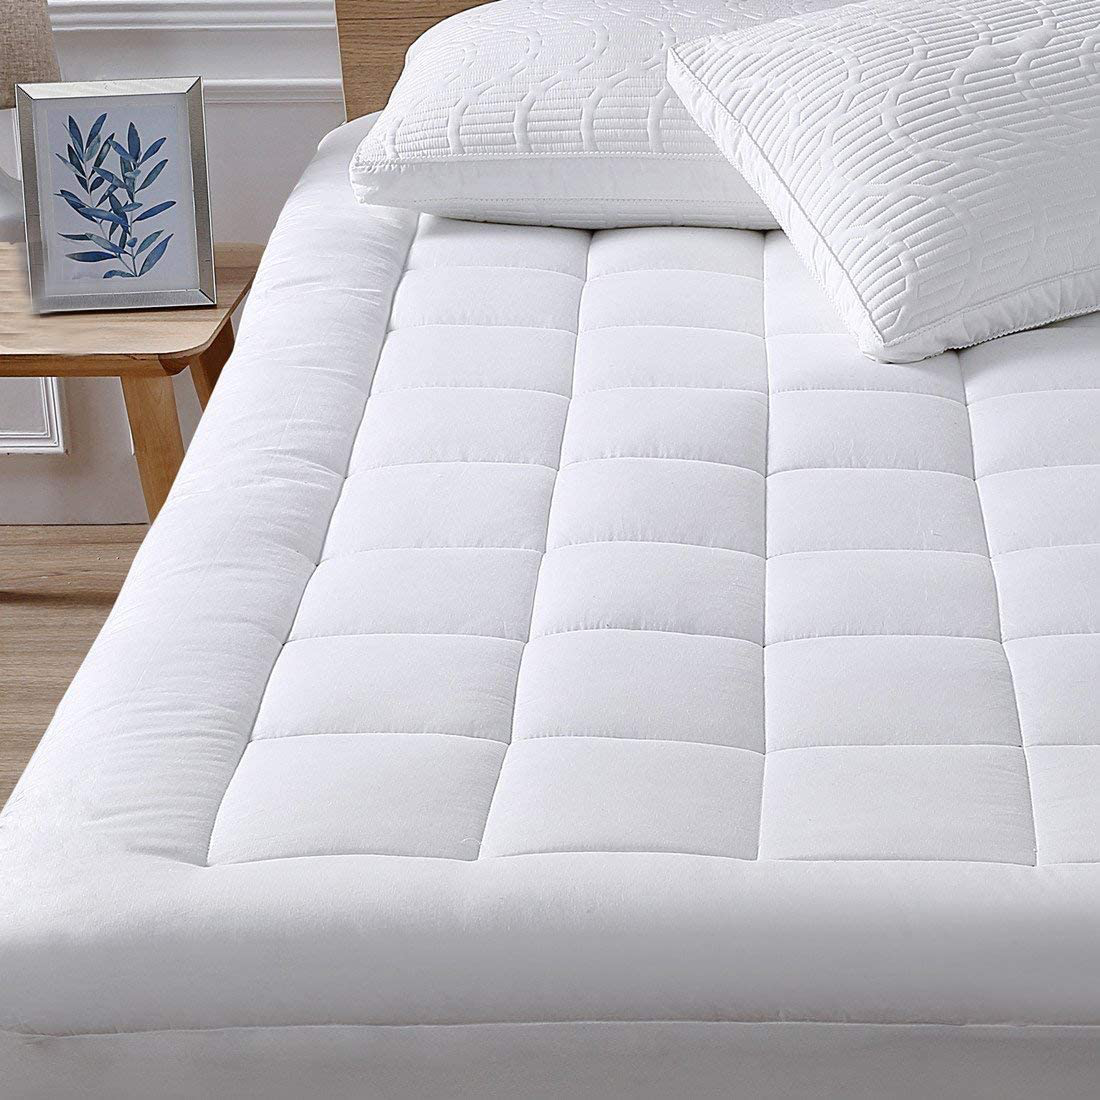 Twin Mattress Pad Cover Top with Stretches to 18” Deep Pocket Fits Up to 8”-21” Cooling White Bed Topper (Down Alternative, Twin Size)